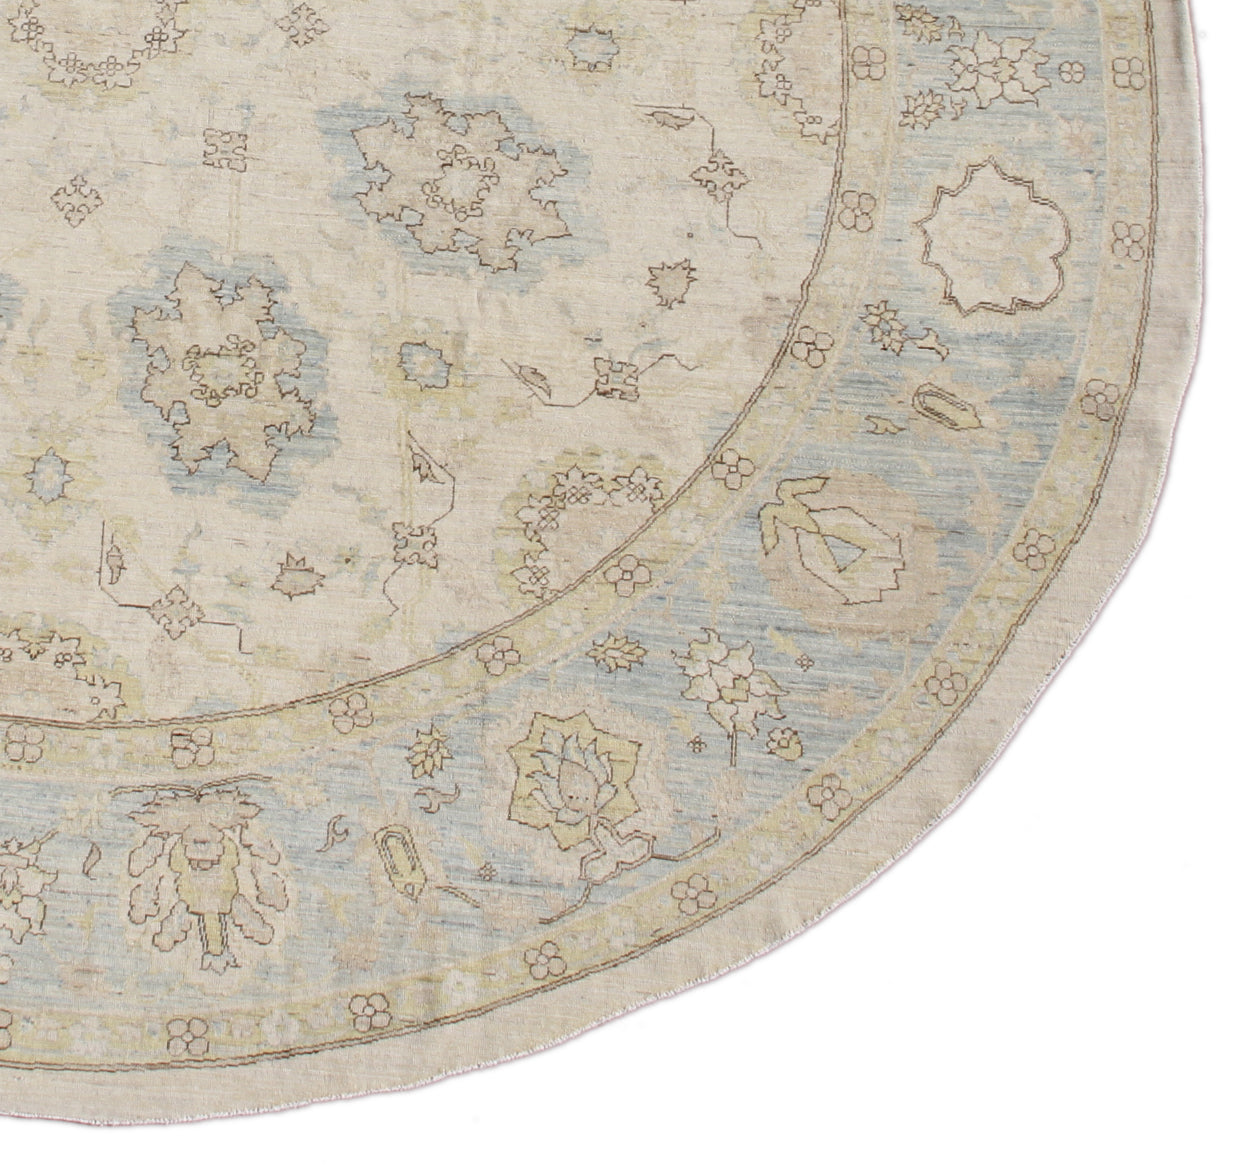 10'x10' Ariana Traditional Beige and Sky Blue Hand Knotted Round Wool Rug